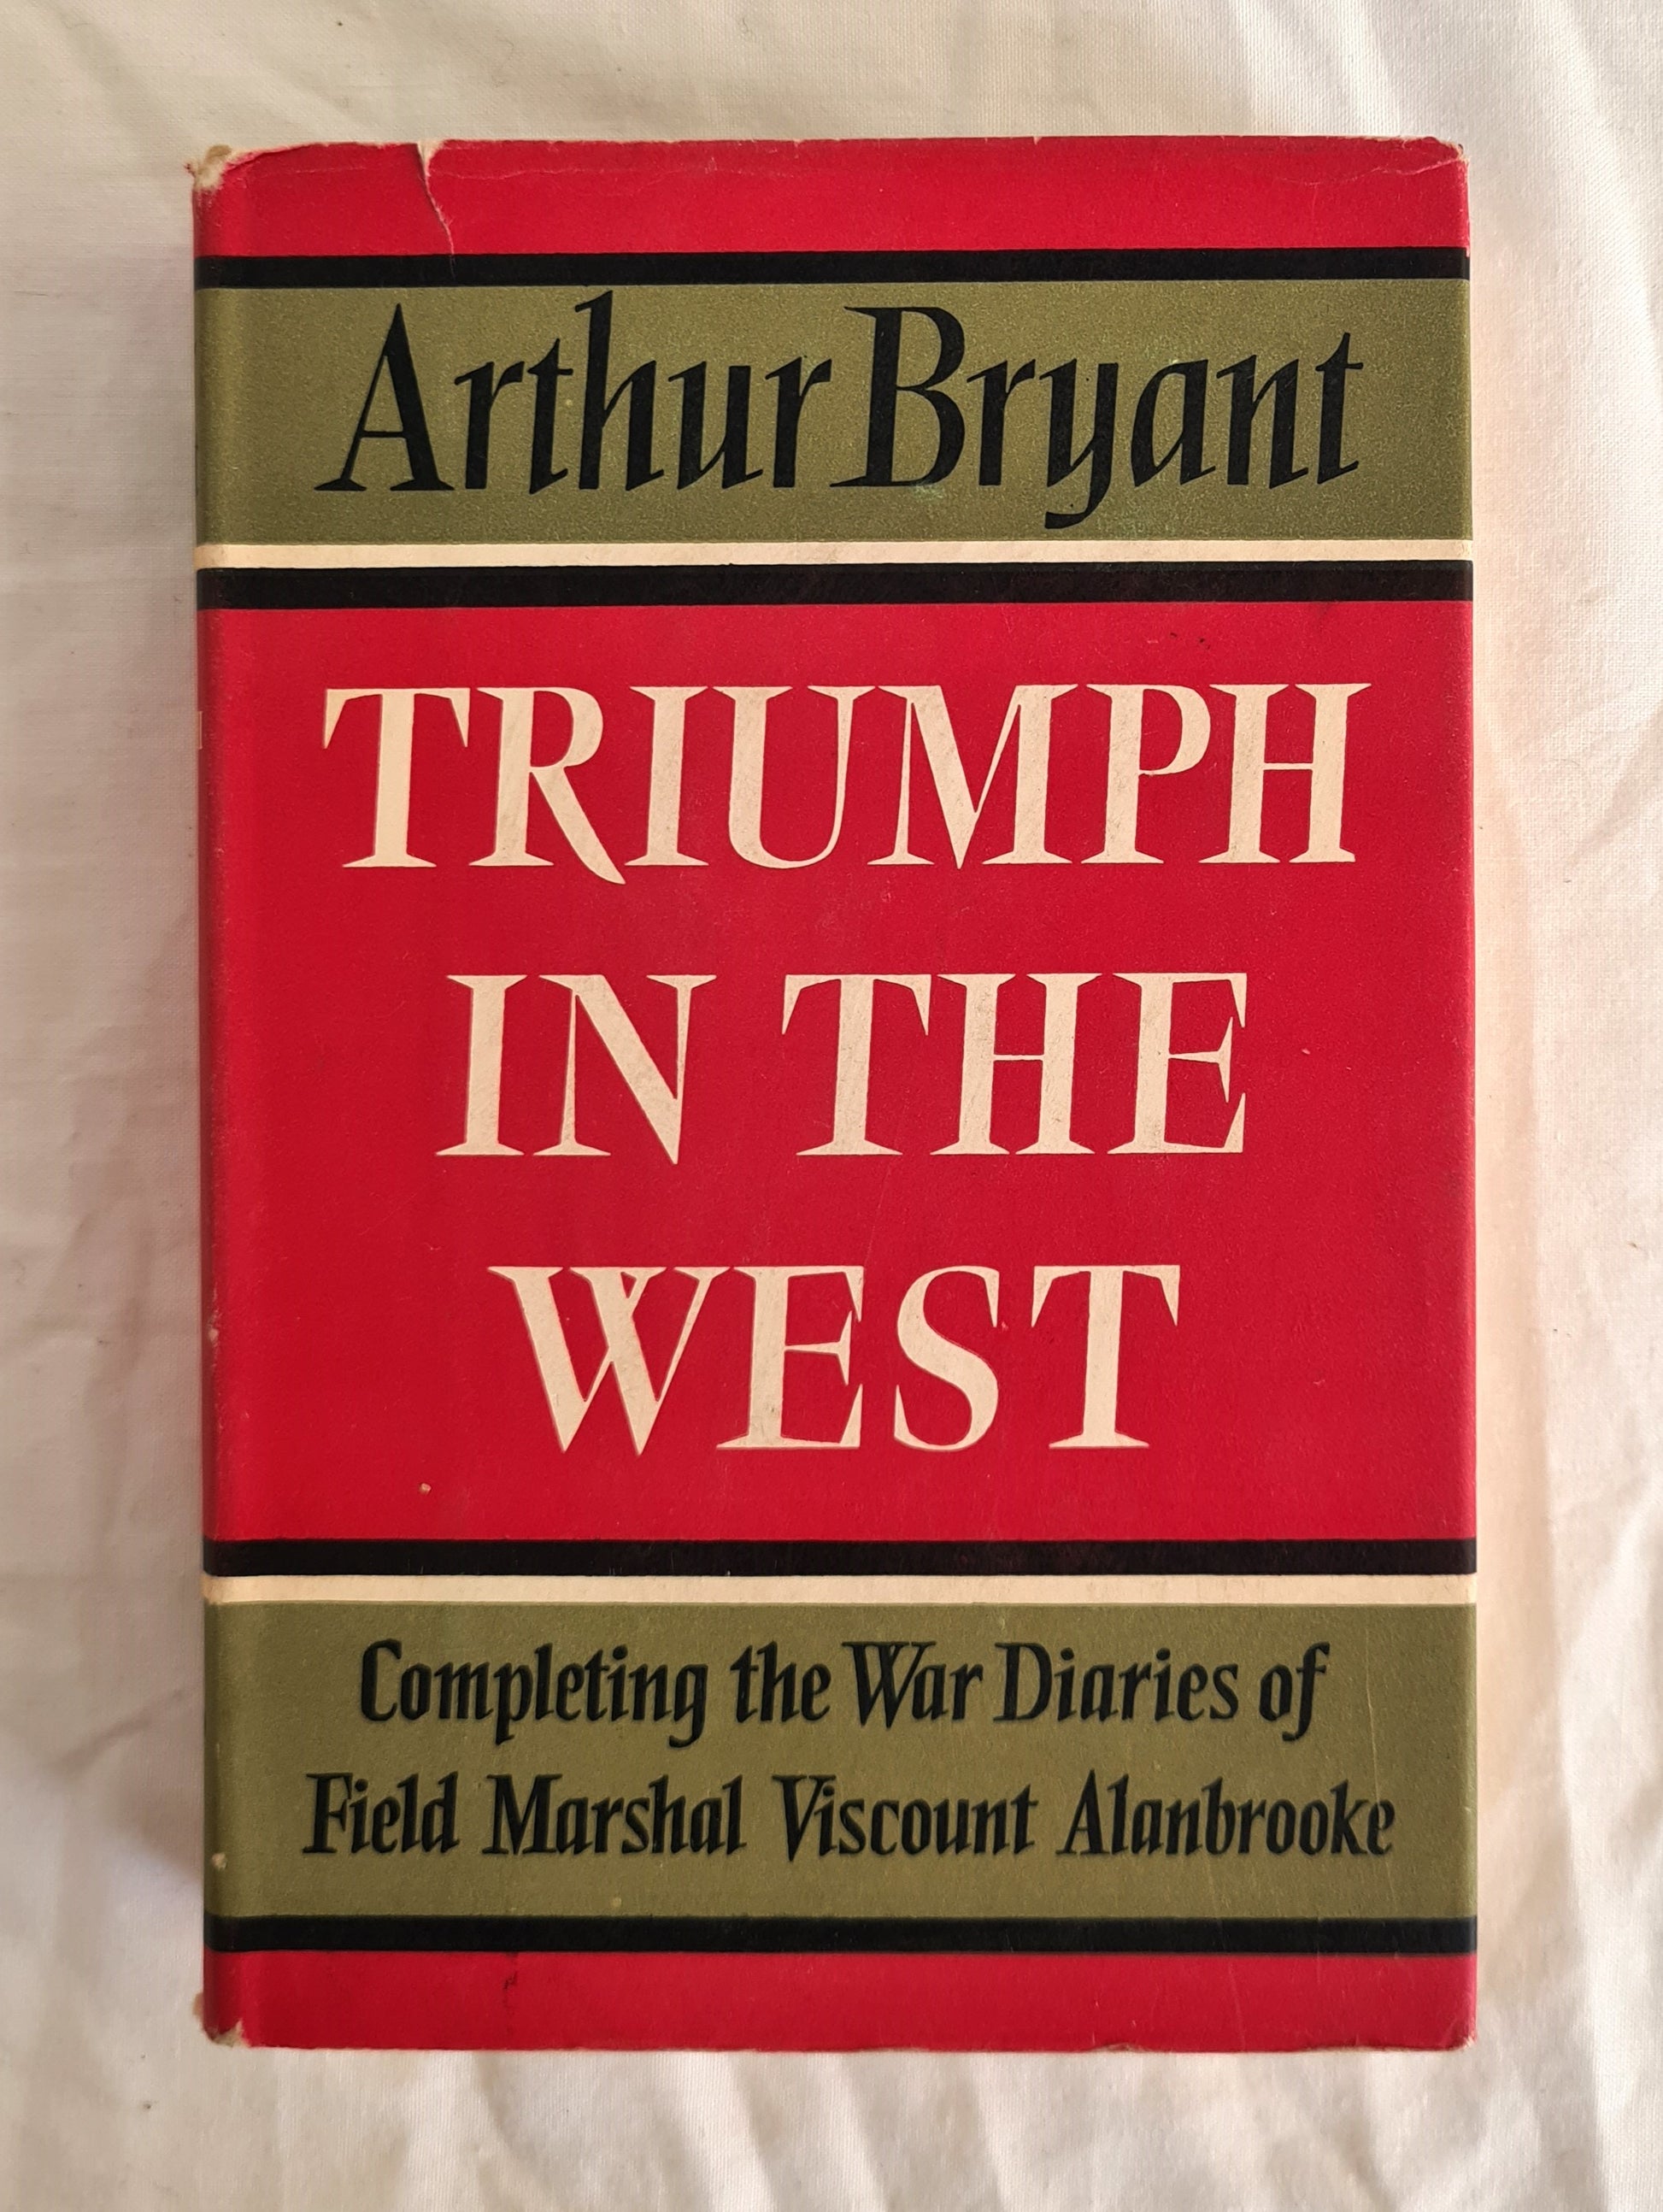 Triumph in the West 1943-1946  Based on the Diaries and Autobiographical Notes of Field Marshal The Viscount Alanbrooke  by Arthur Bryant